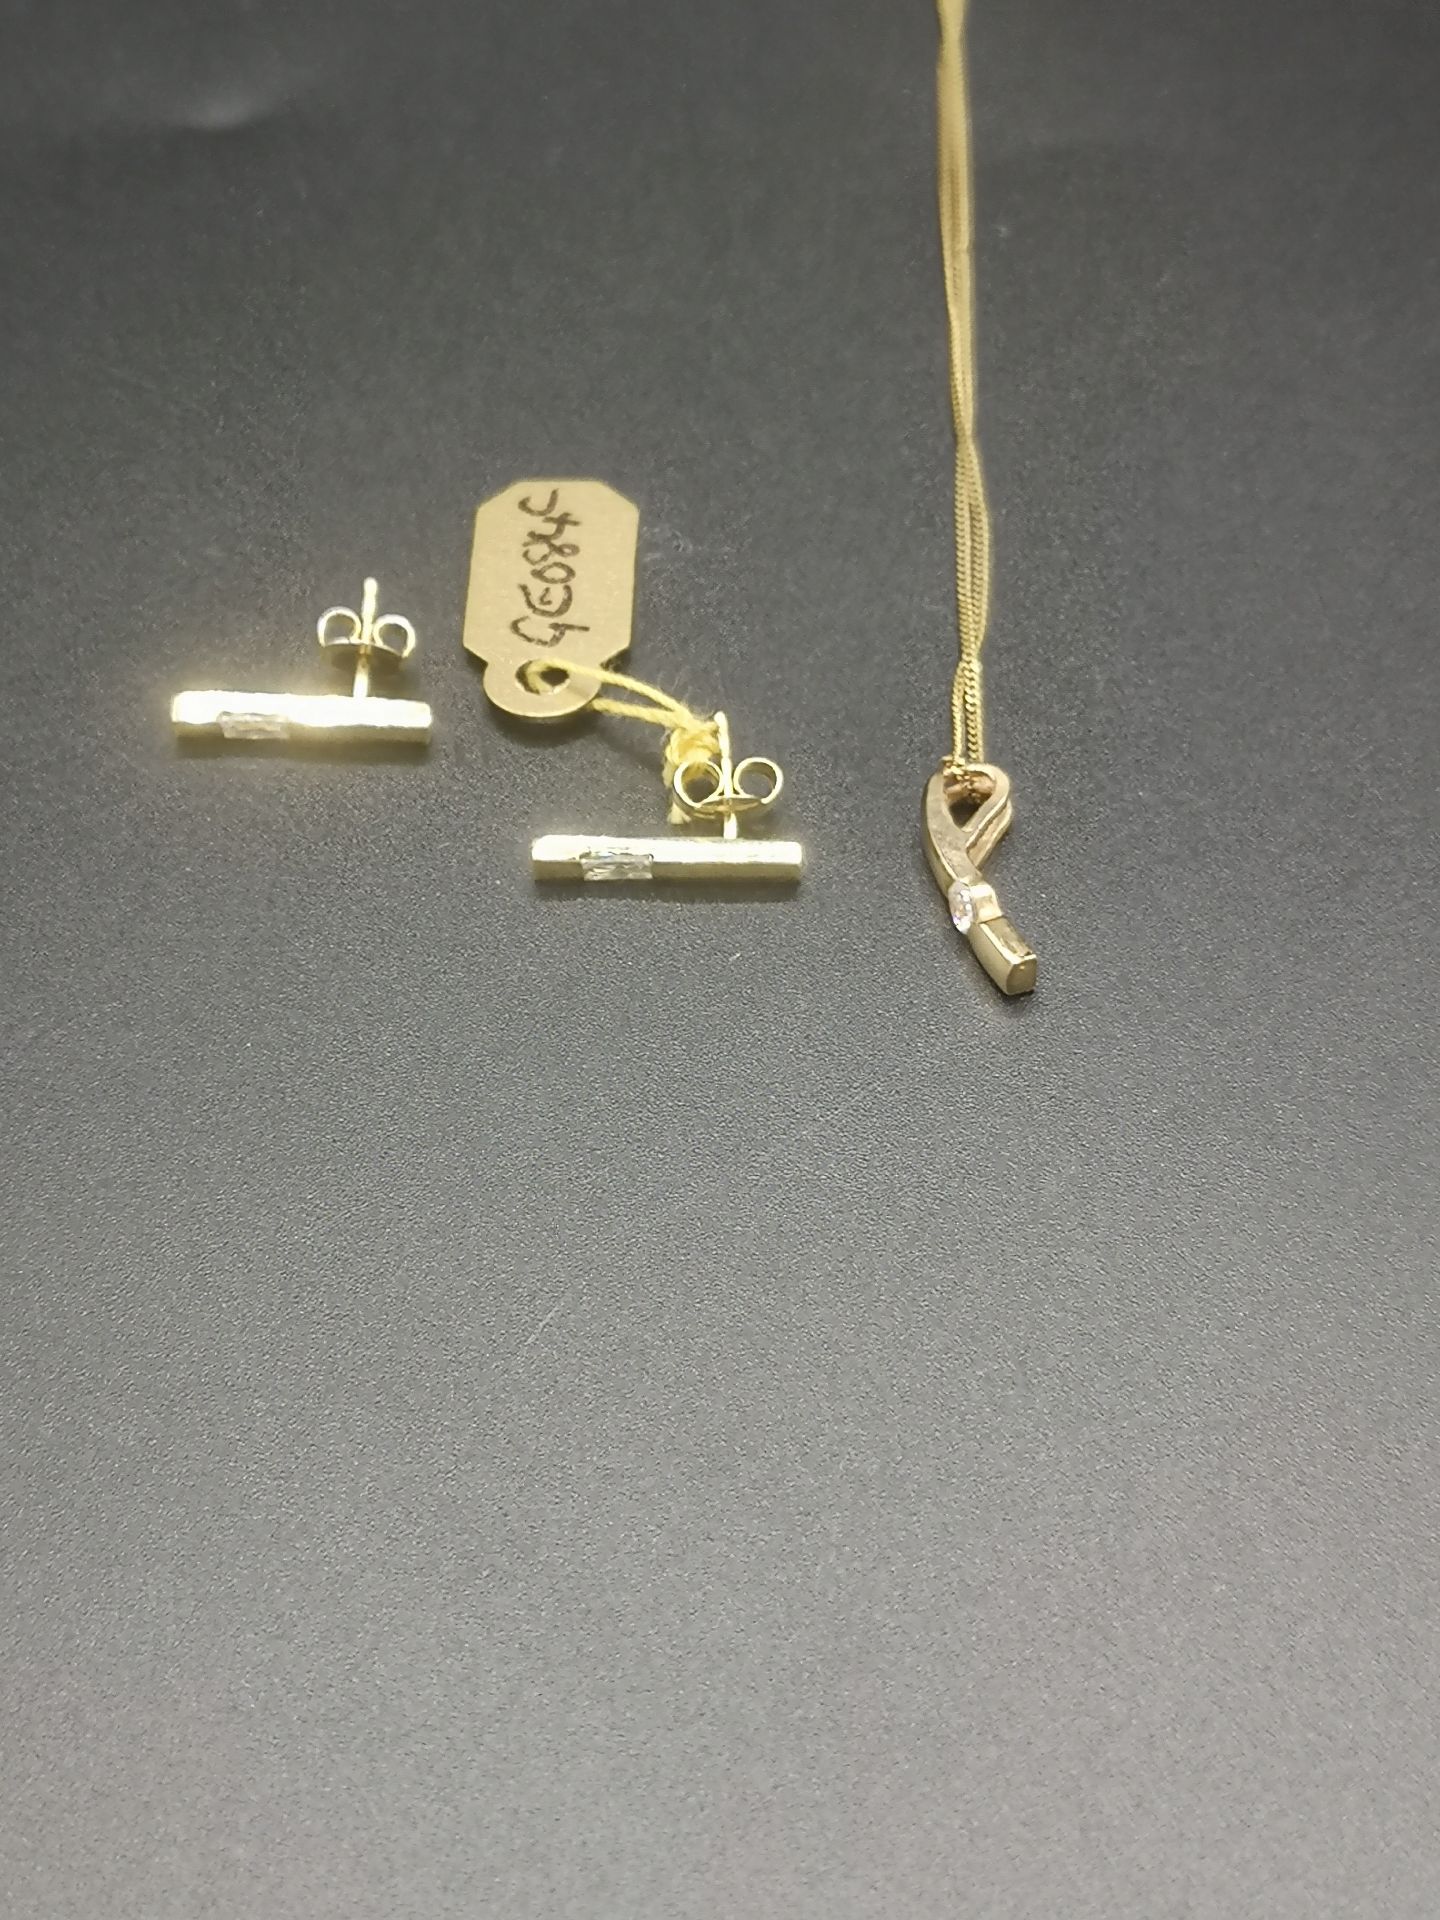 9ct gold chain and pendant, with matching 9ct earrings - Image 3 of 6